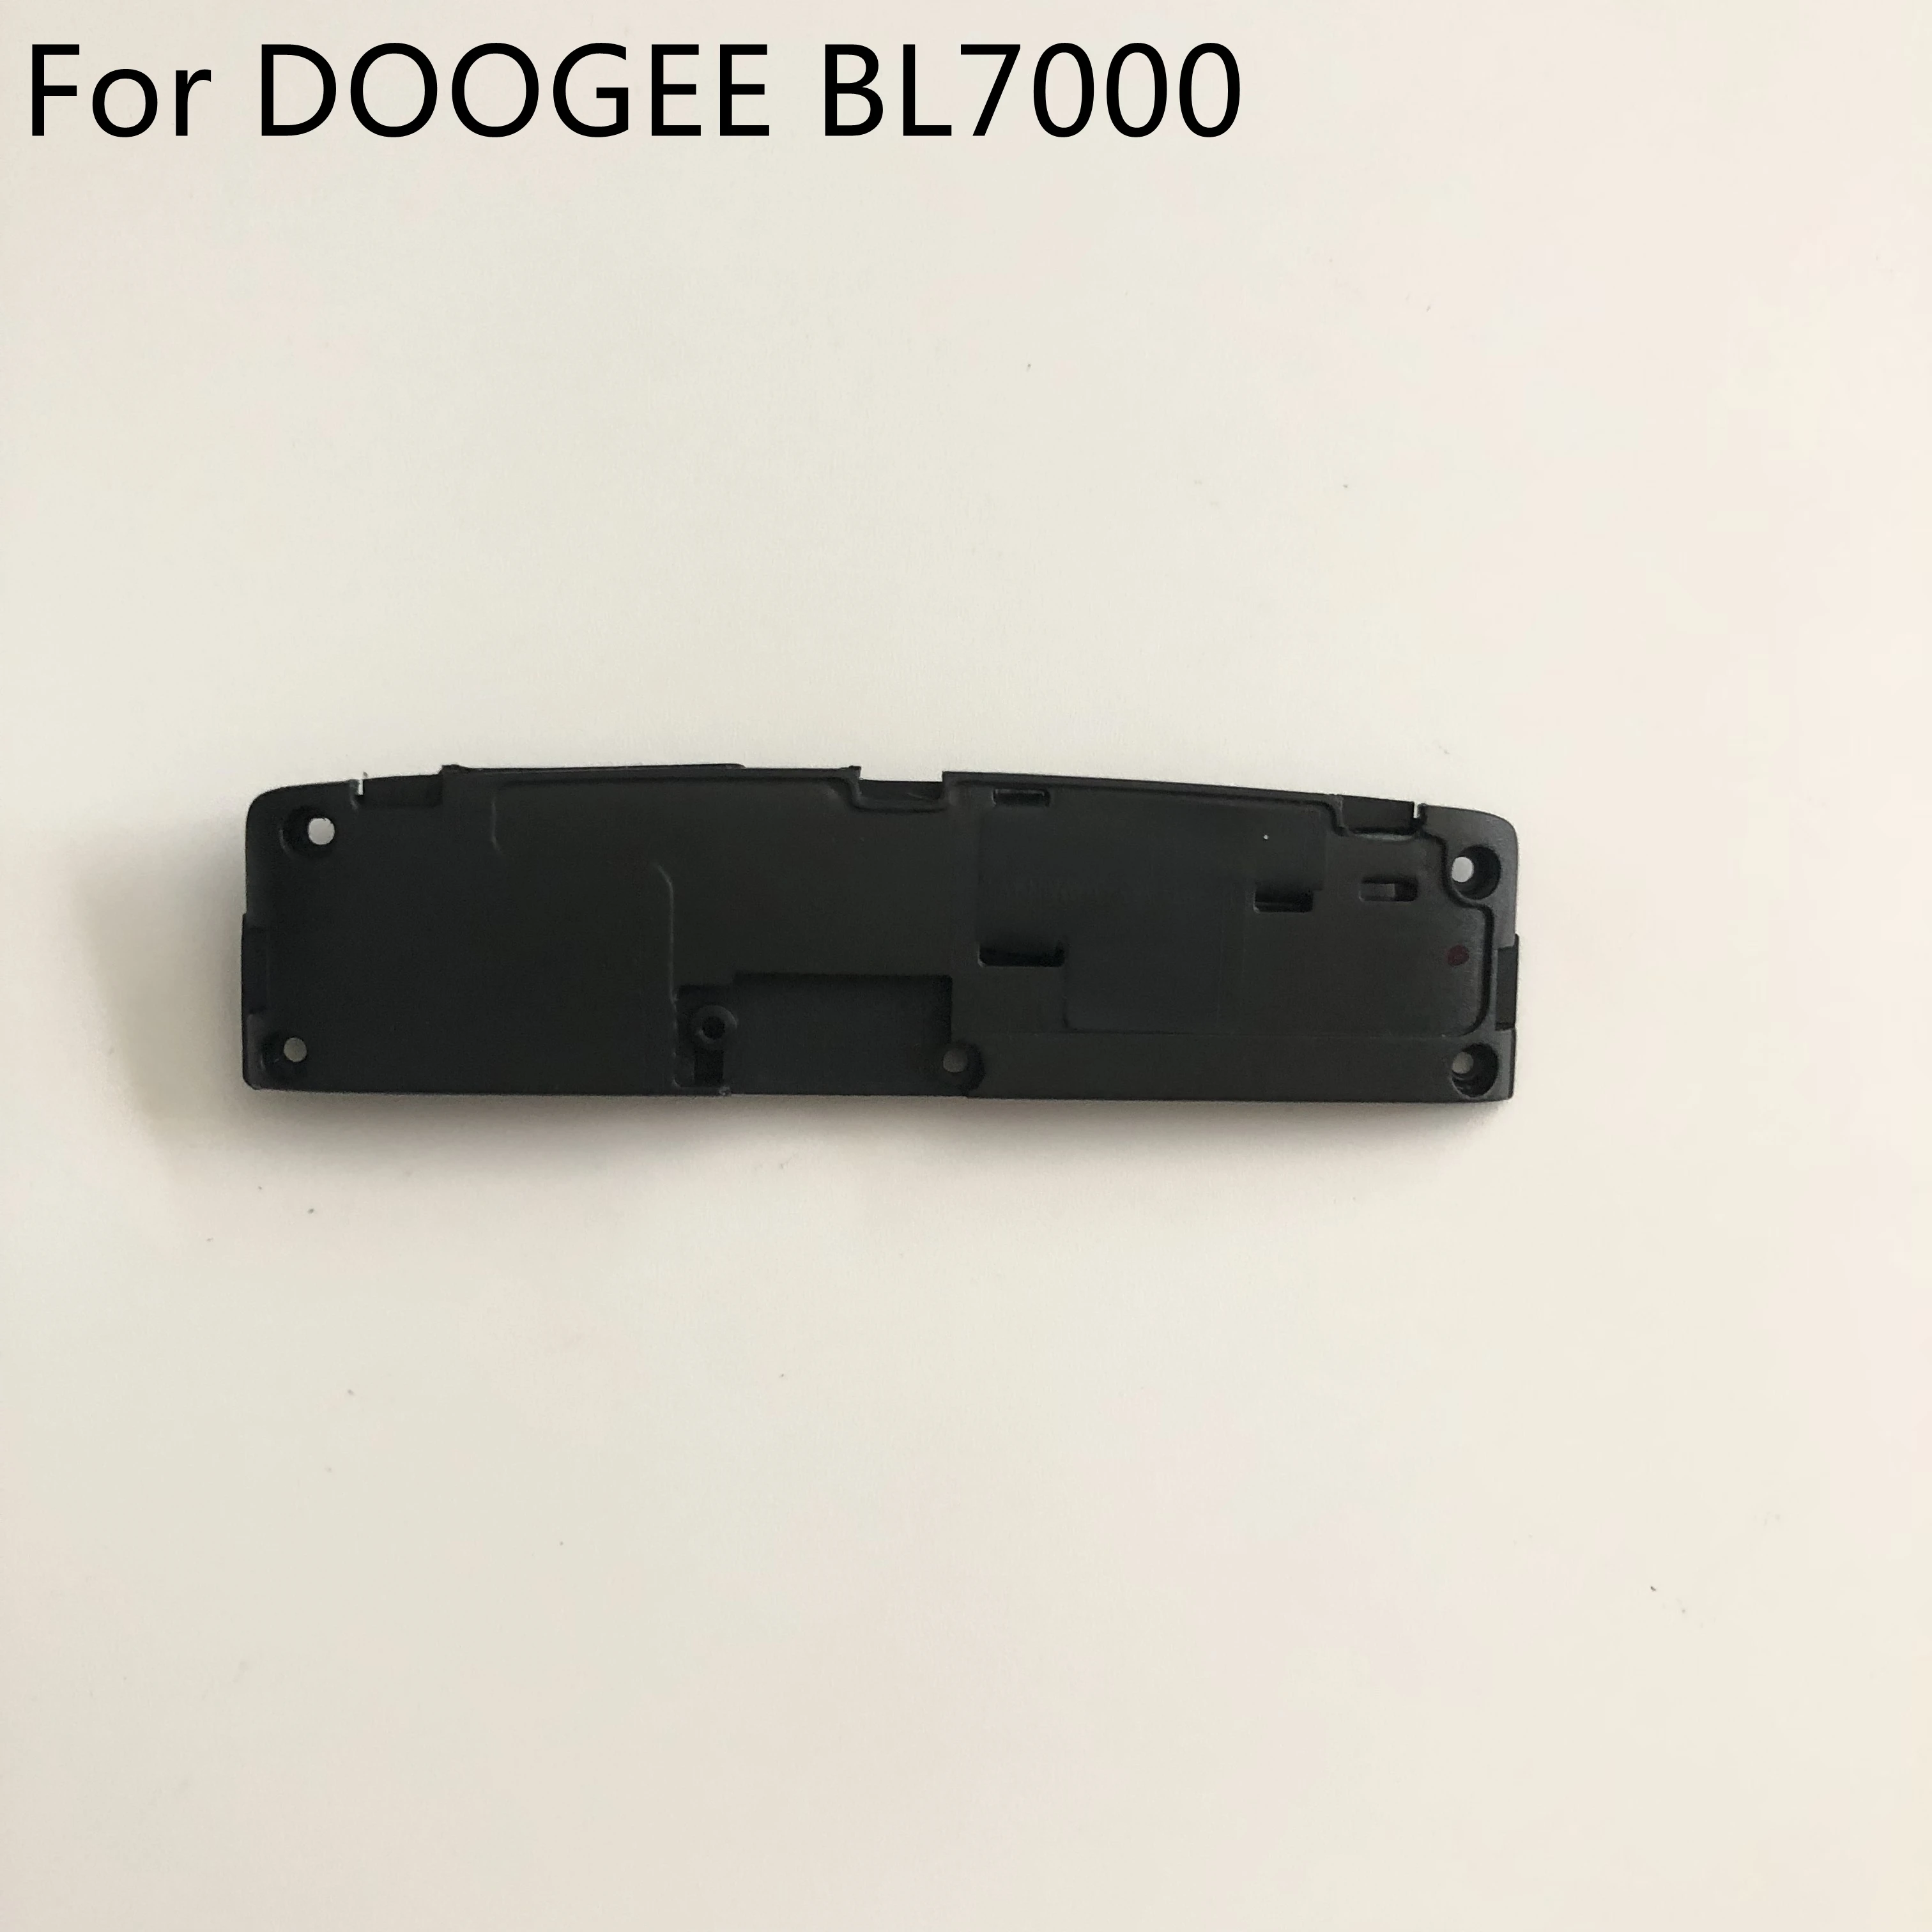 

Loud Speaker Buzzer Ringer For DOOGEE BL7000 MTK6750T Octa Core 5.5'' FHD 1920x1080 + Tracking Number